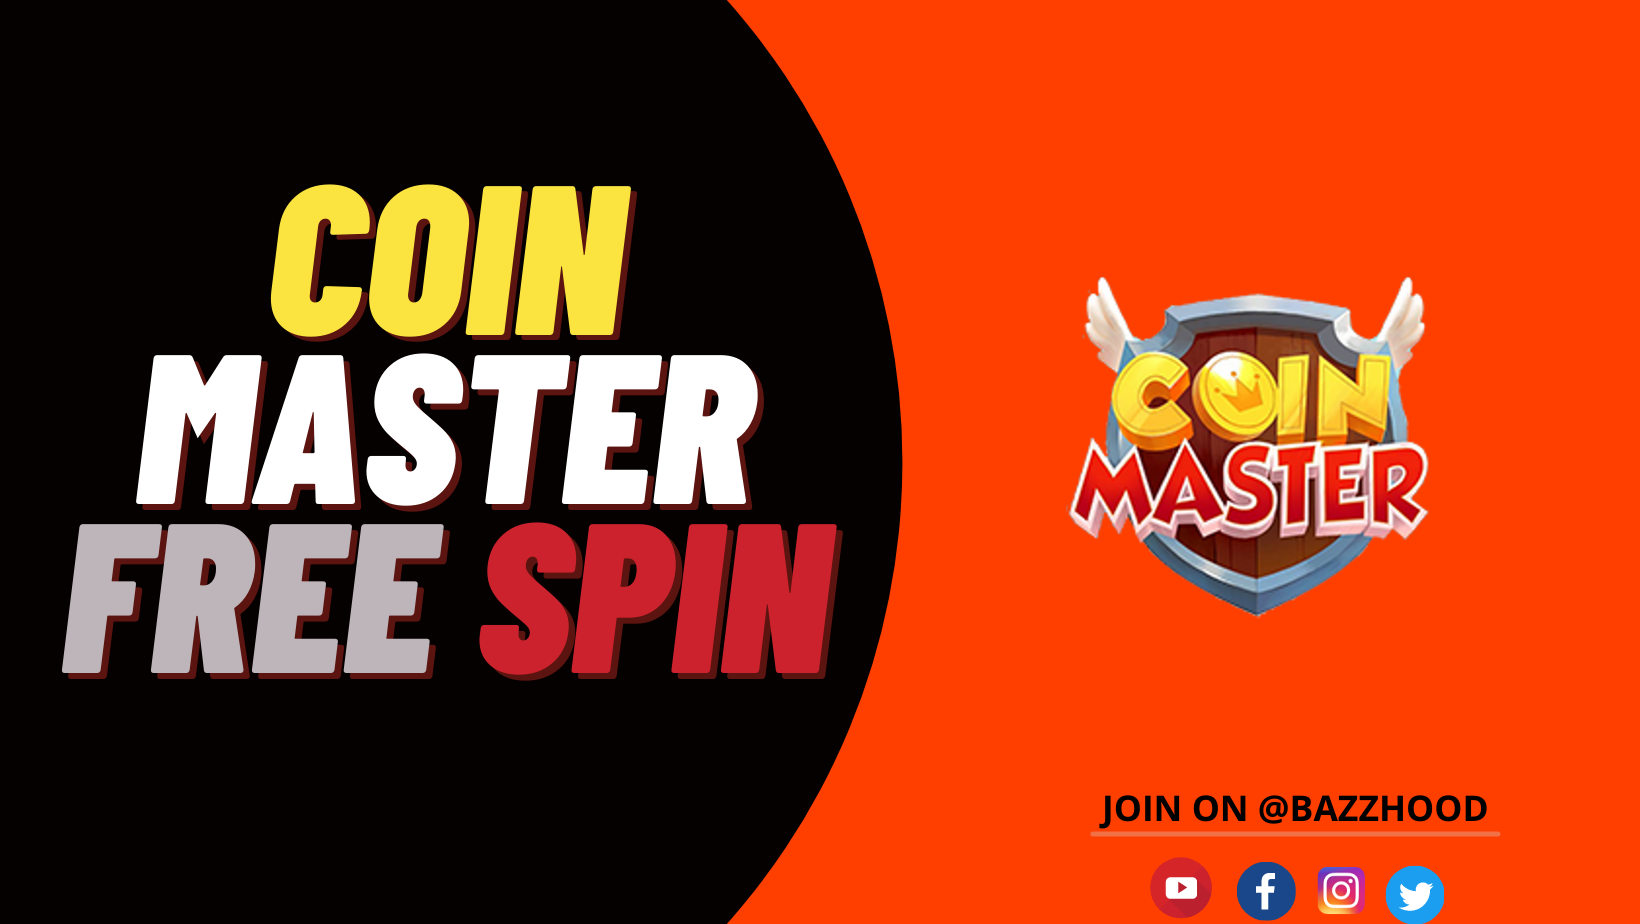 Daily links for coin master free spins and coins for thug life